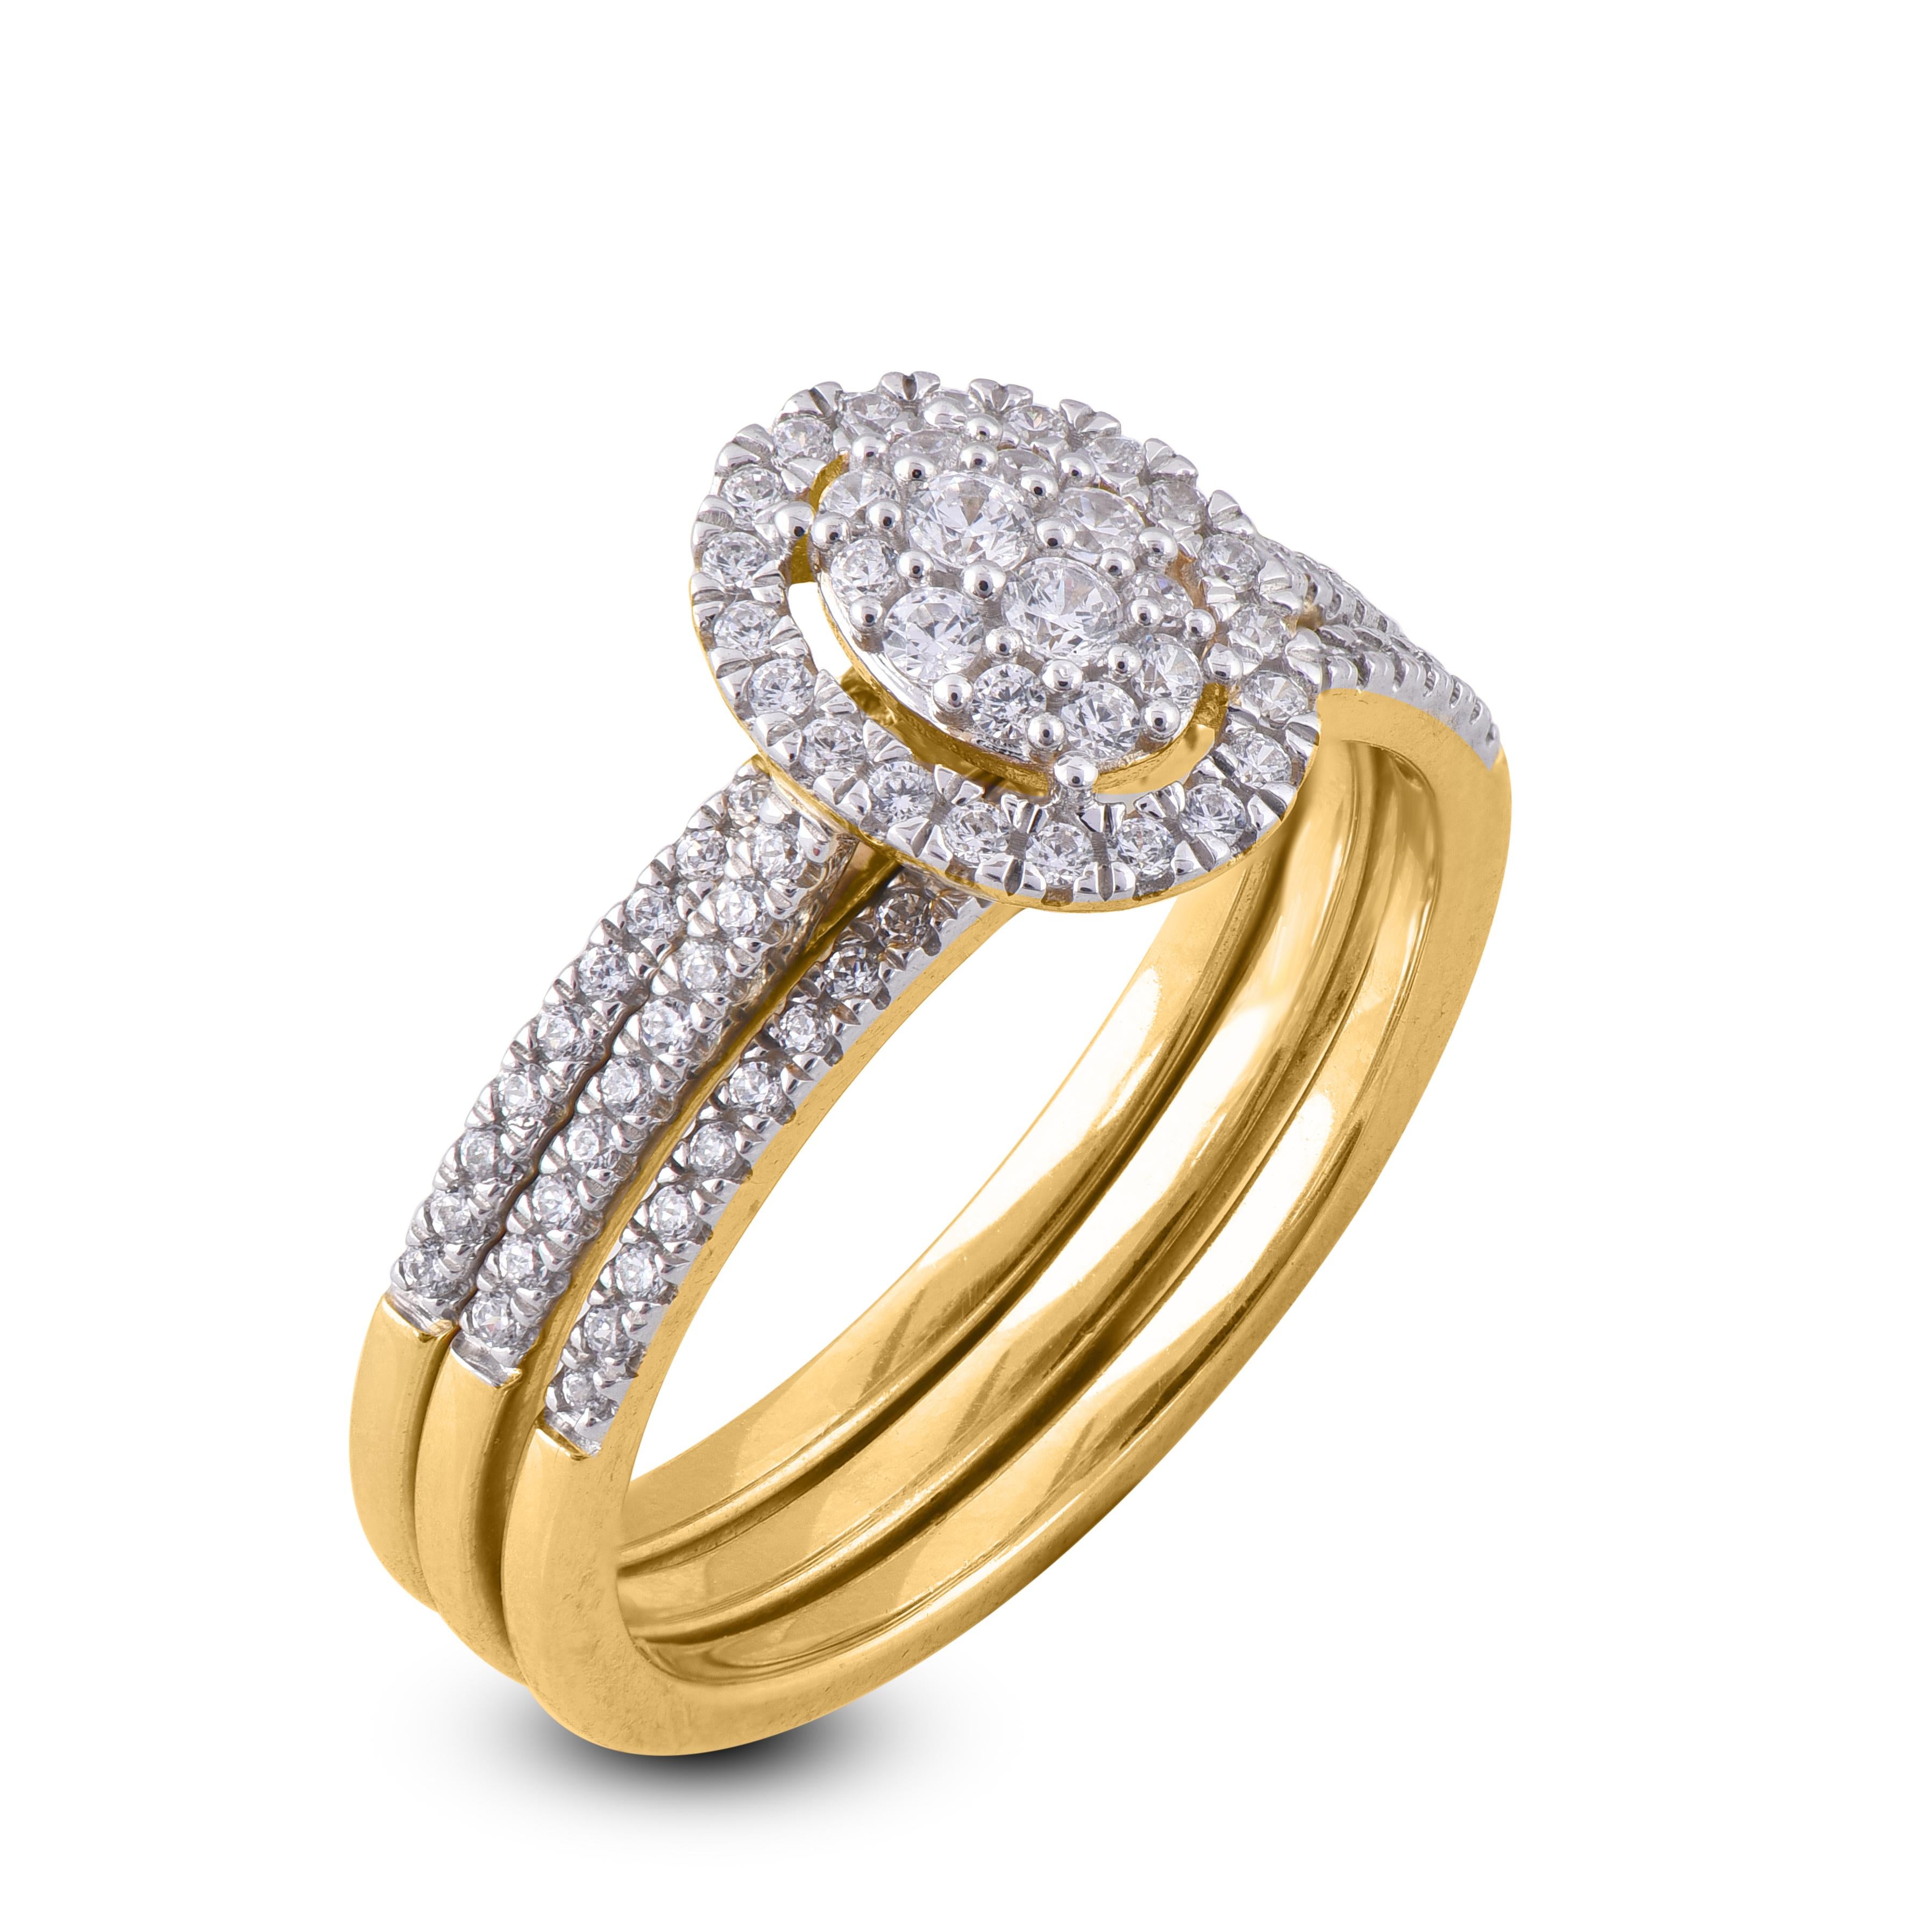 A beautiful Engagement Ring with 96 diamonds in prong, setting crafted in 14 karat Yellow gold, diamonds are graded H-I color I2 Clarity
